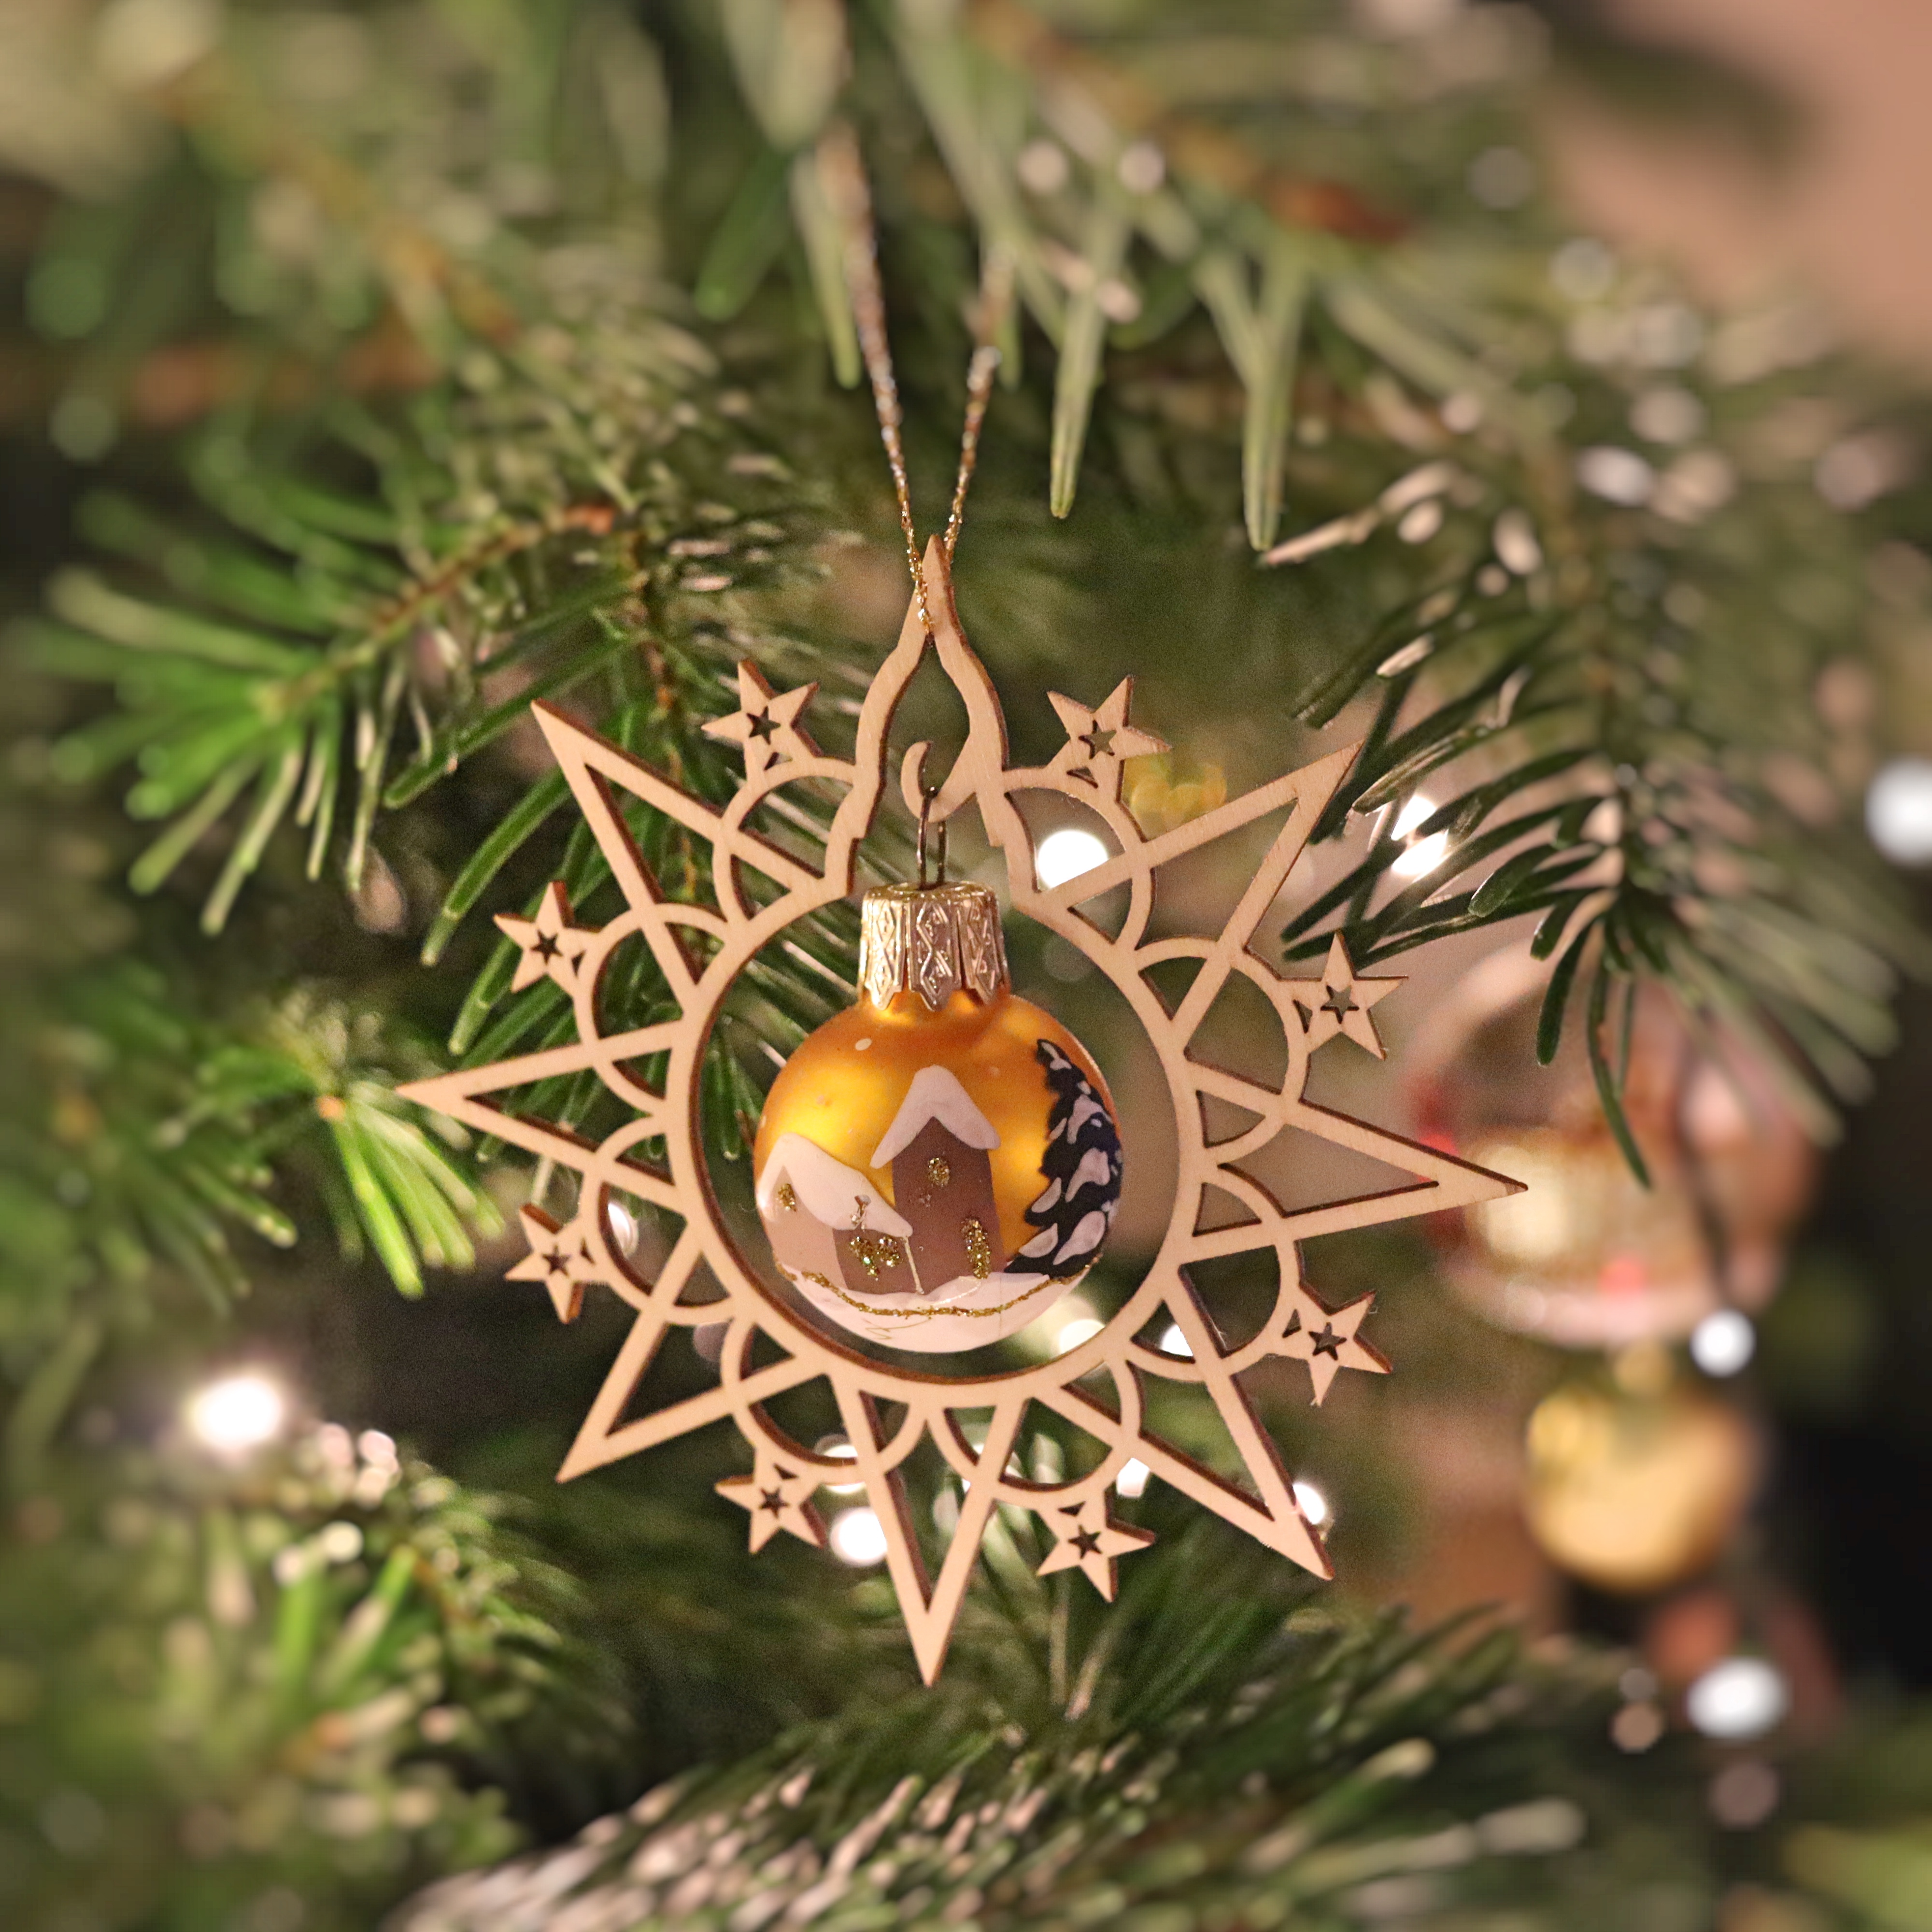 Around the world in Christmas baubles – Cheeky Travelholics